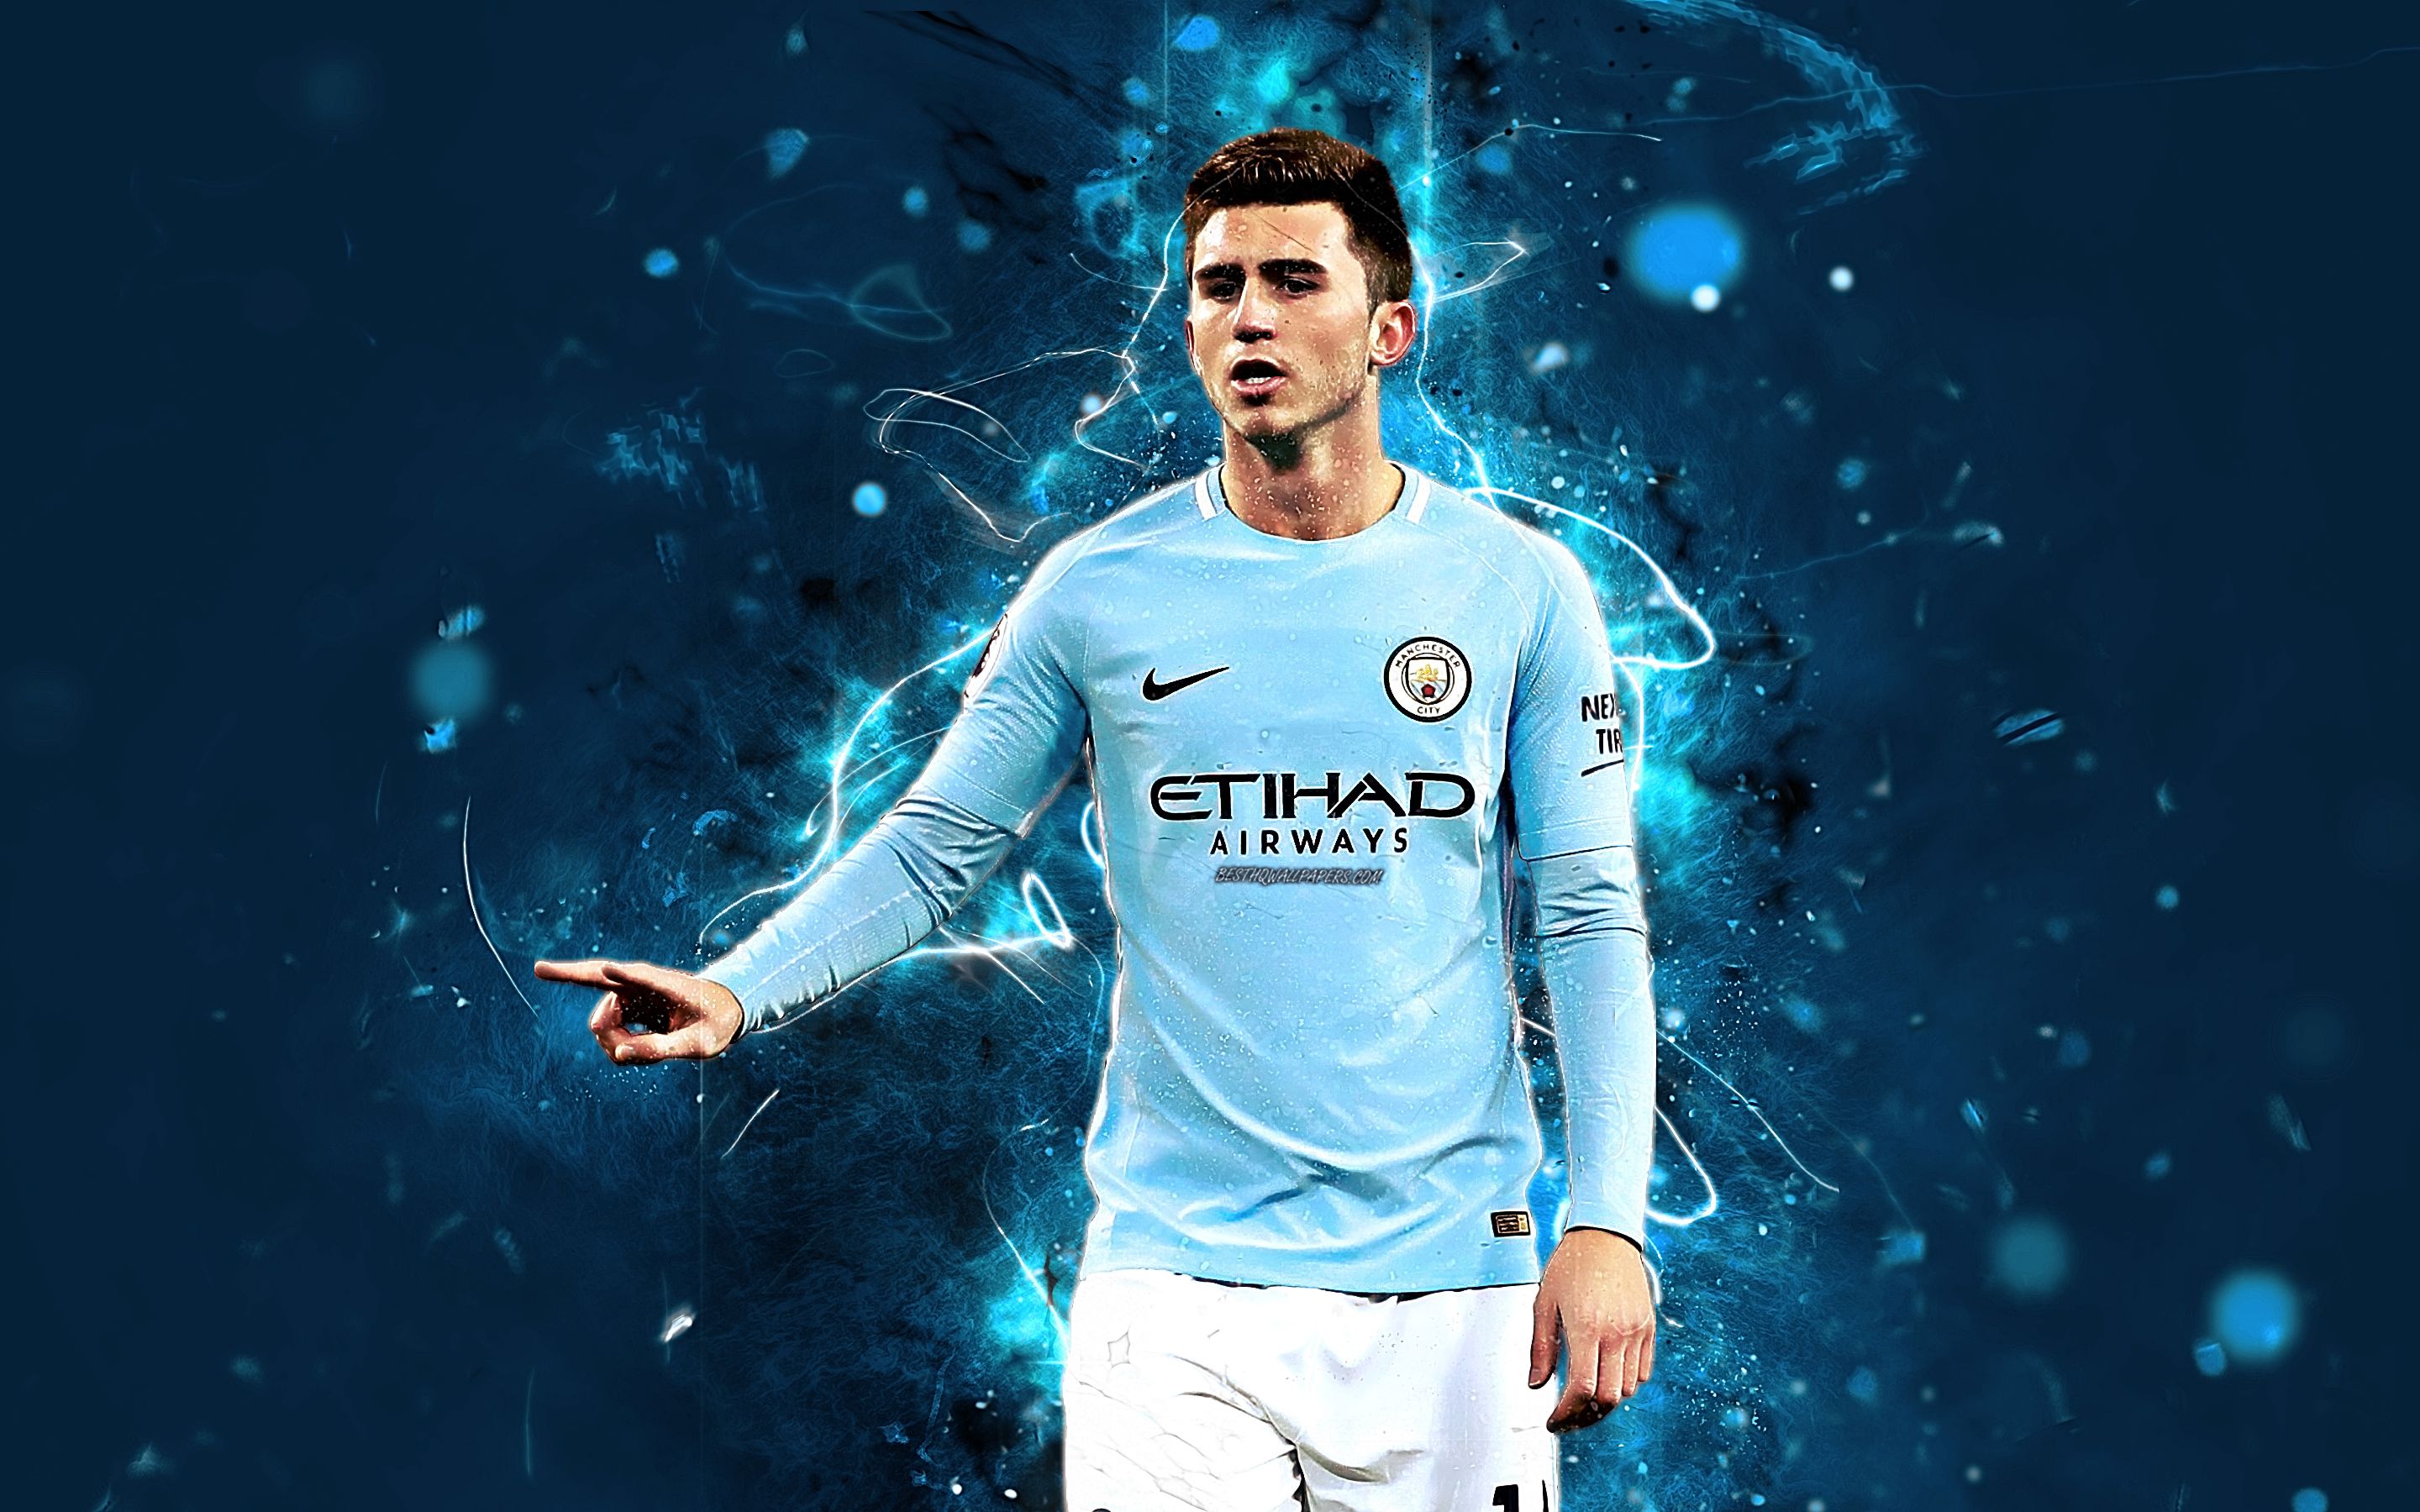 Download wallpaper Aymeric Laporte, French footballer, Manchester City FC, soccer, Laporte, Premier League, Man City, neon lights for desktop with resolution 2880x1800. High Quality HD picture wallpaper